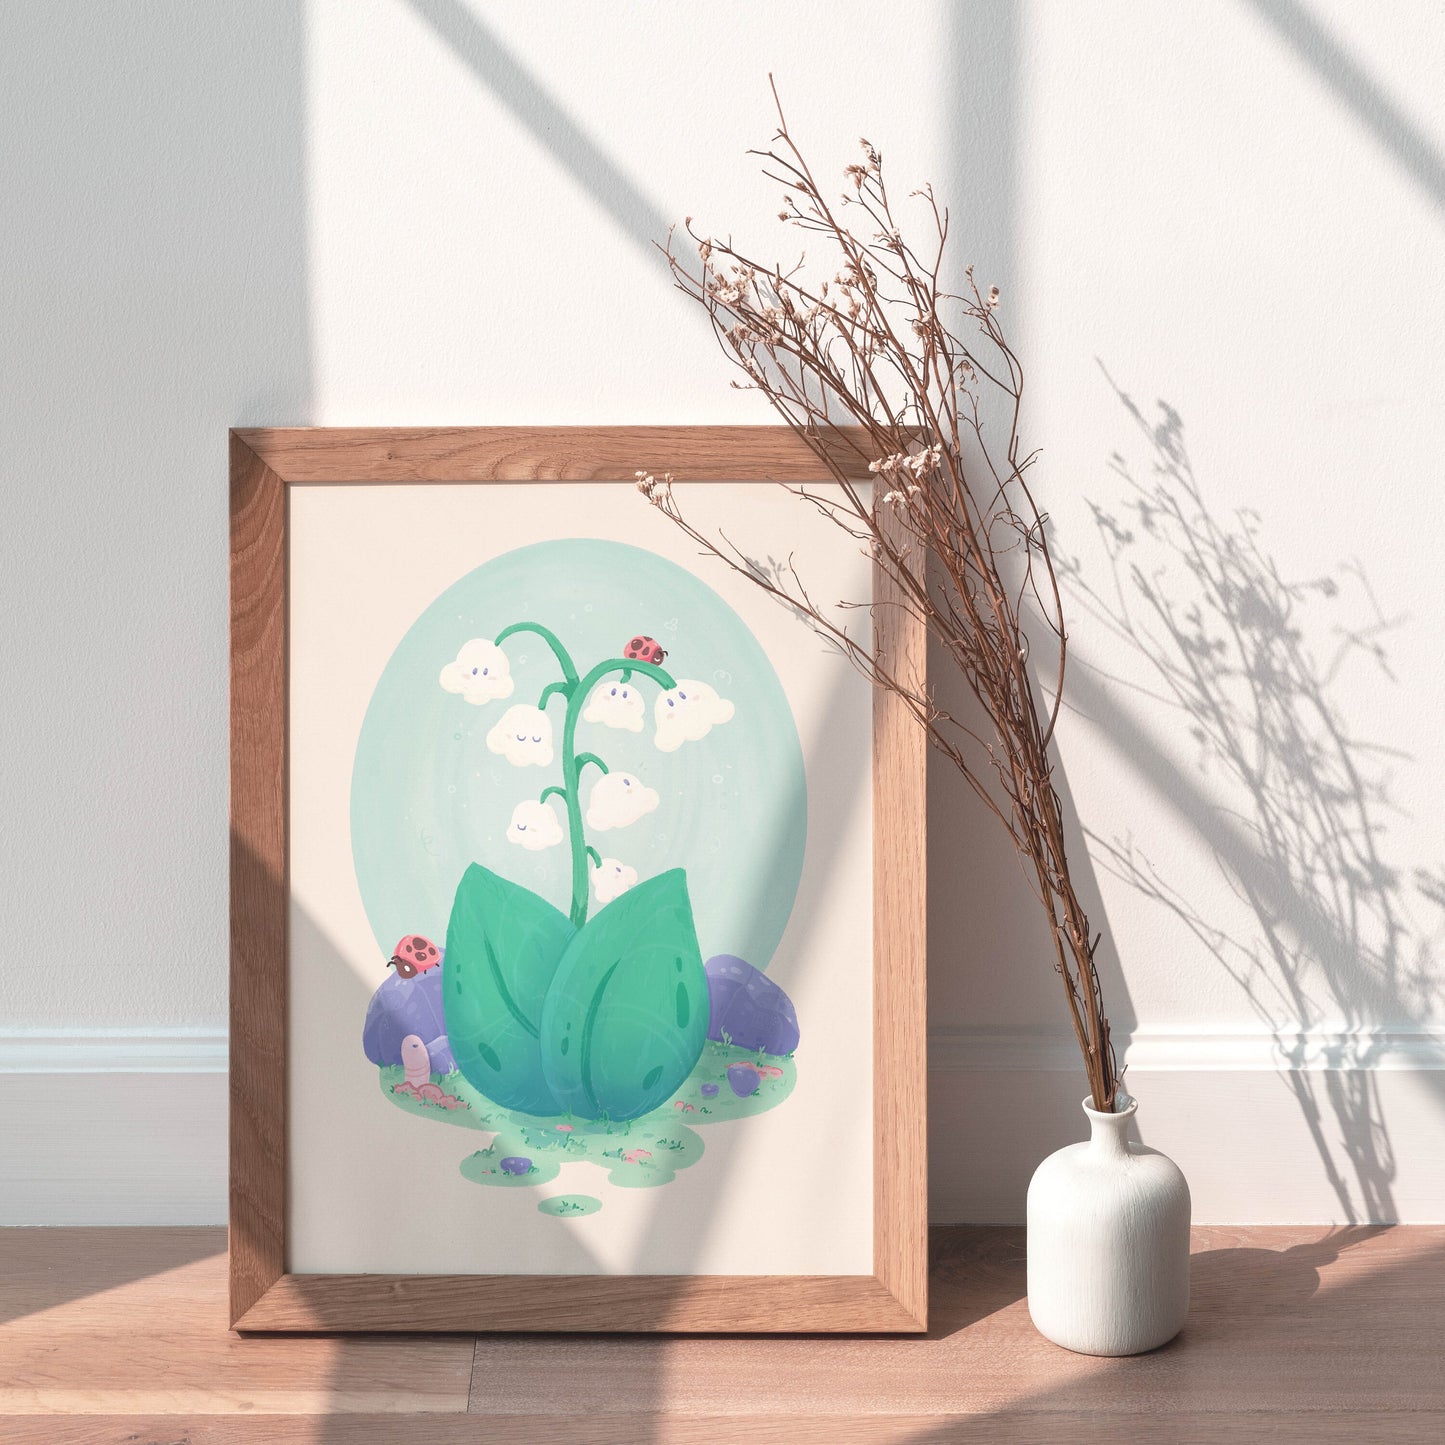 Lilies of the Valley & Friends A4 Print | Cozy Earthy Nature Art Print | Premium Linen Cardboard | Home Decor | Wall Art | Art by Miamouz